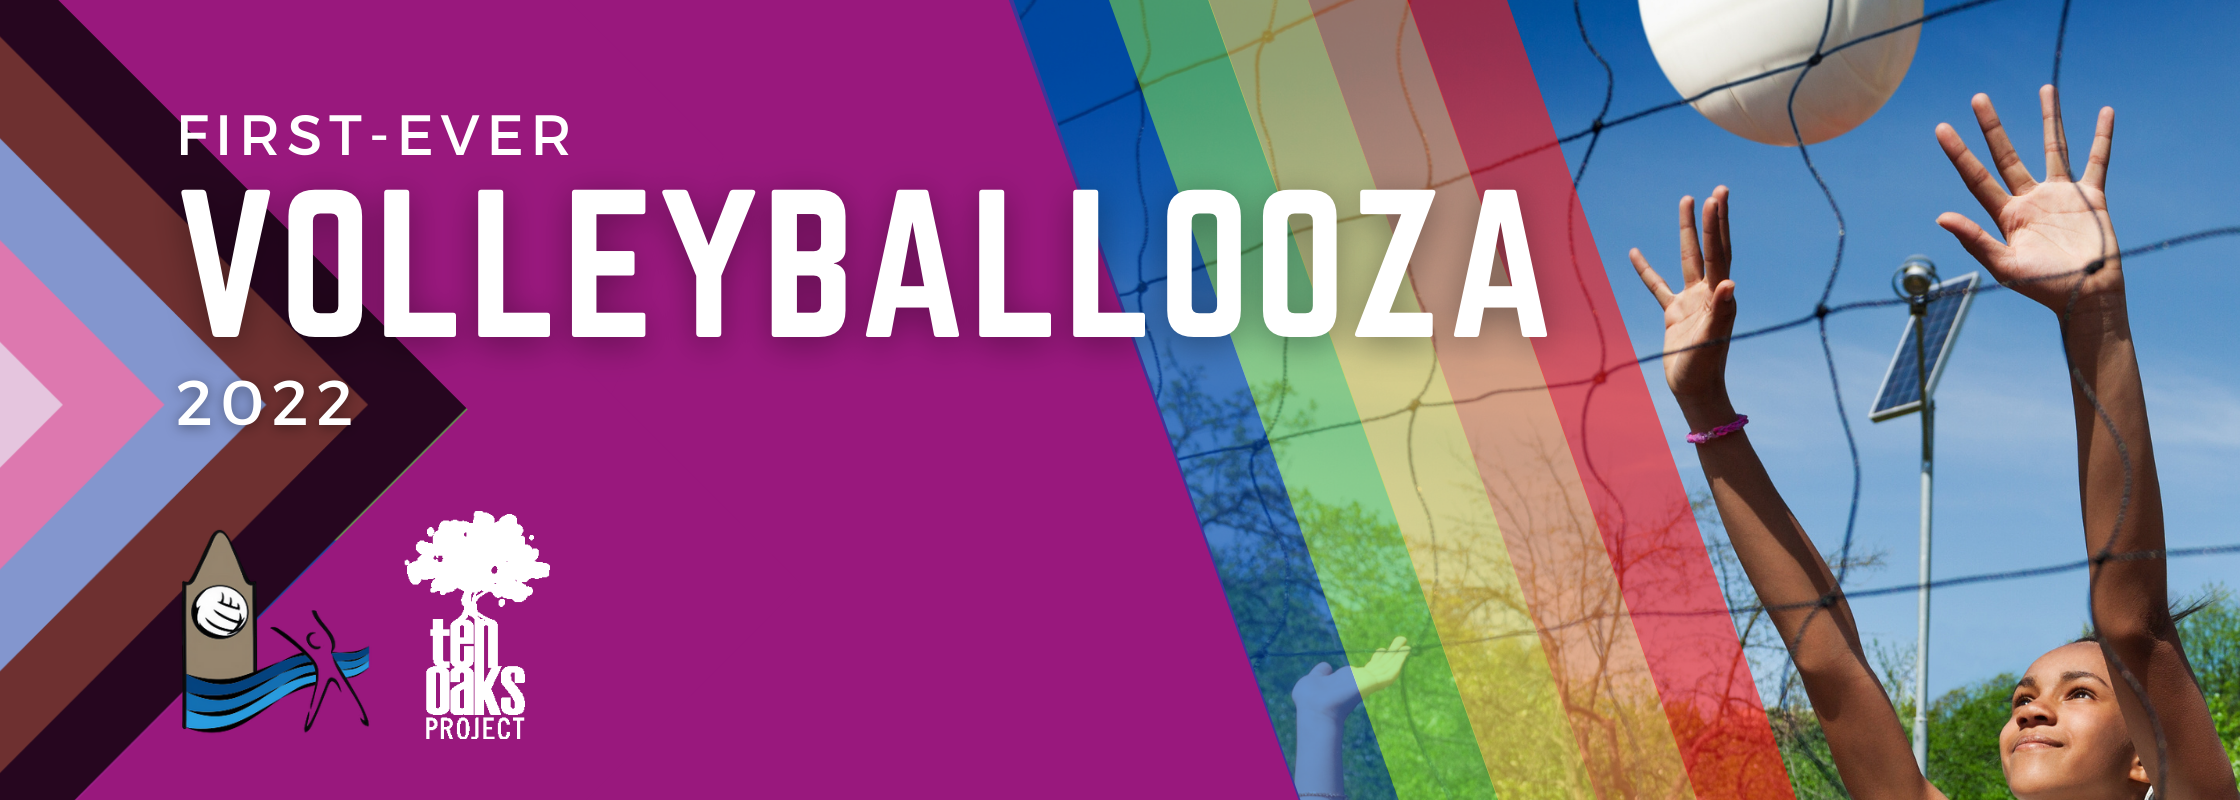 First-ever Volleyballooza 2022